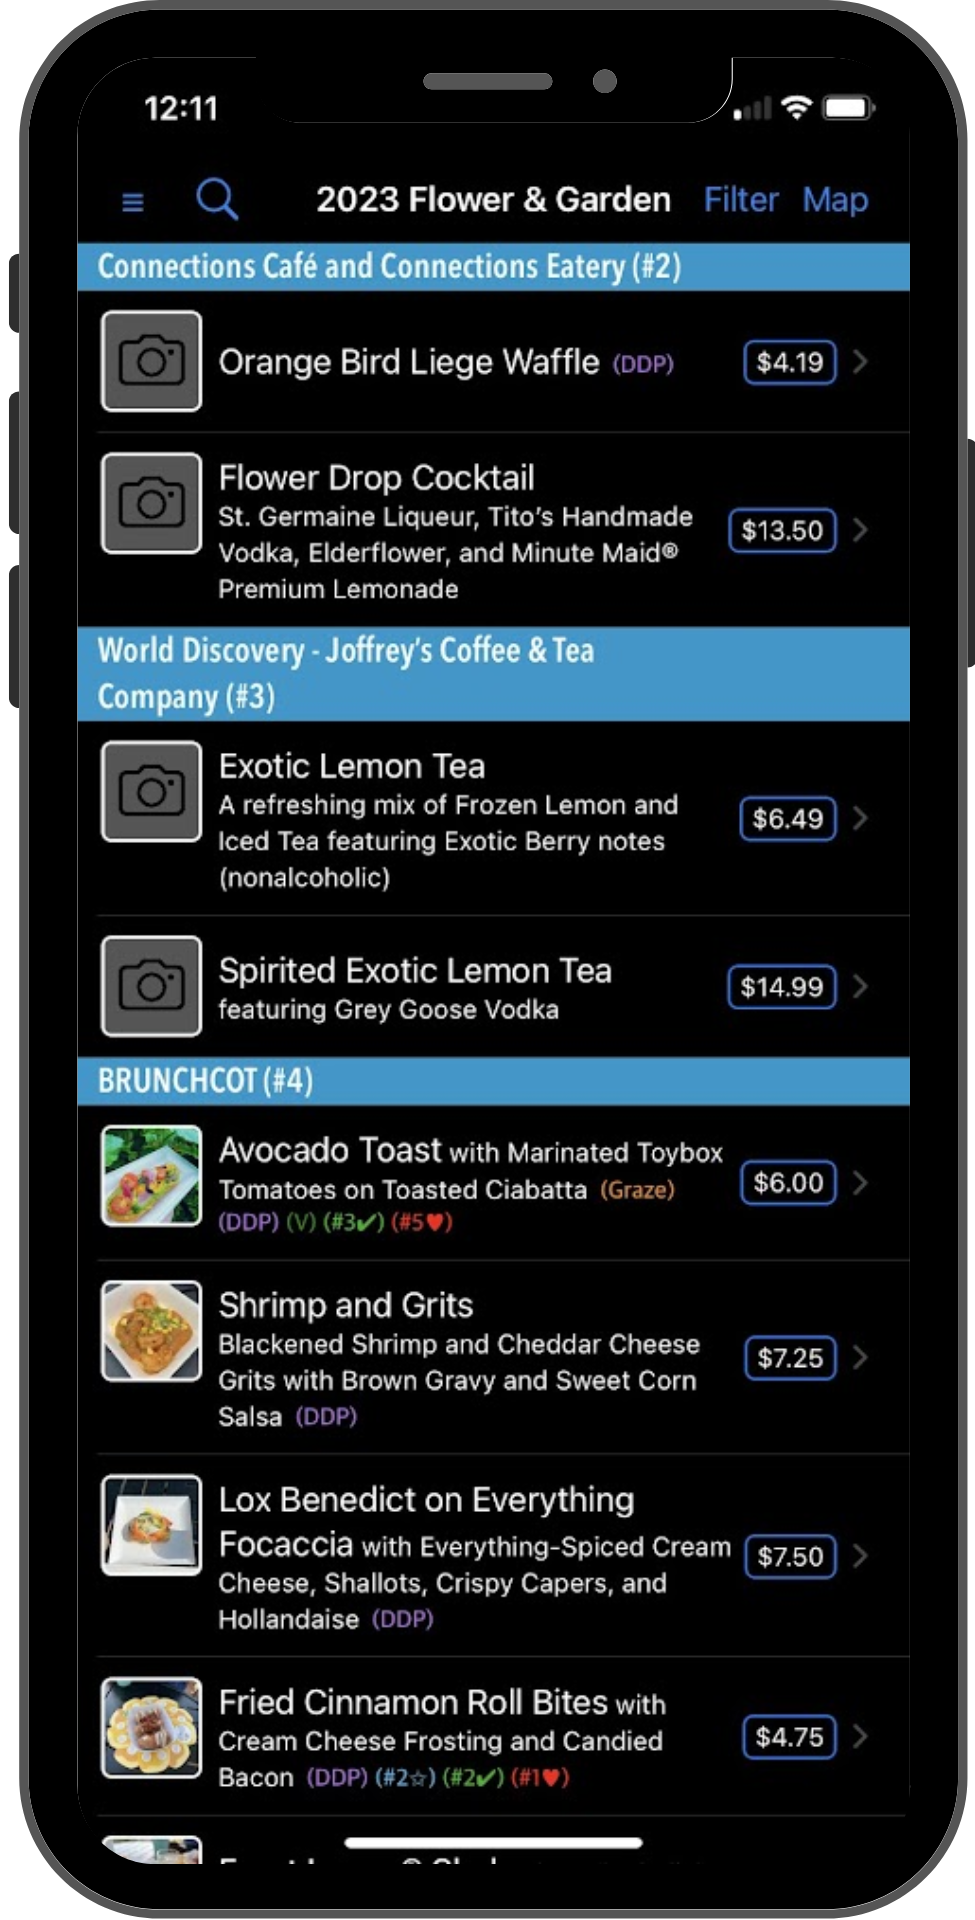 A display (the Event page) shows a list of dishes, divided into sections based on the booth they belong to.